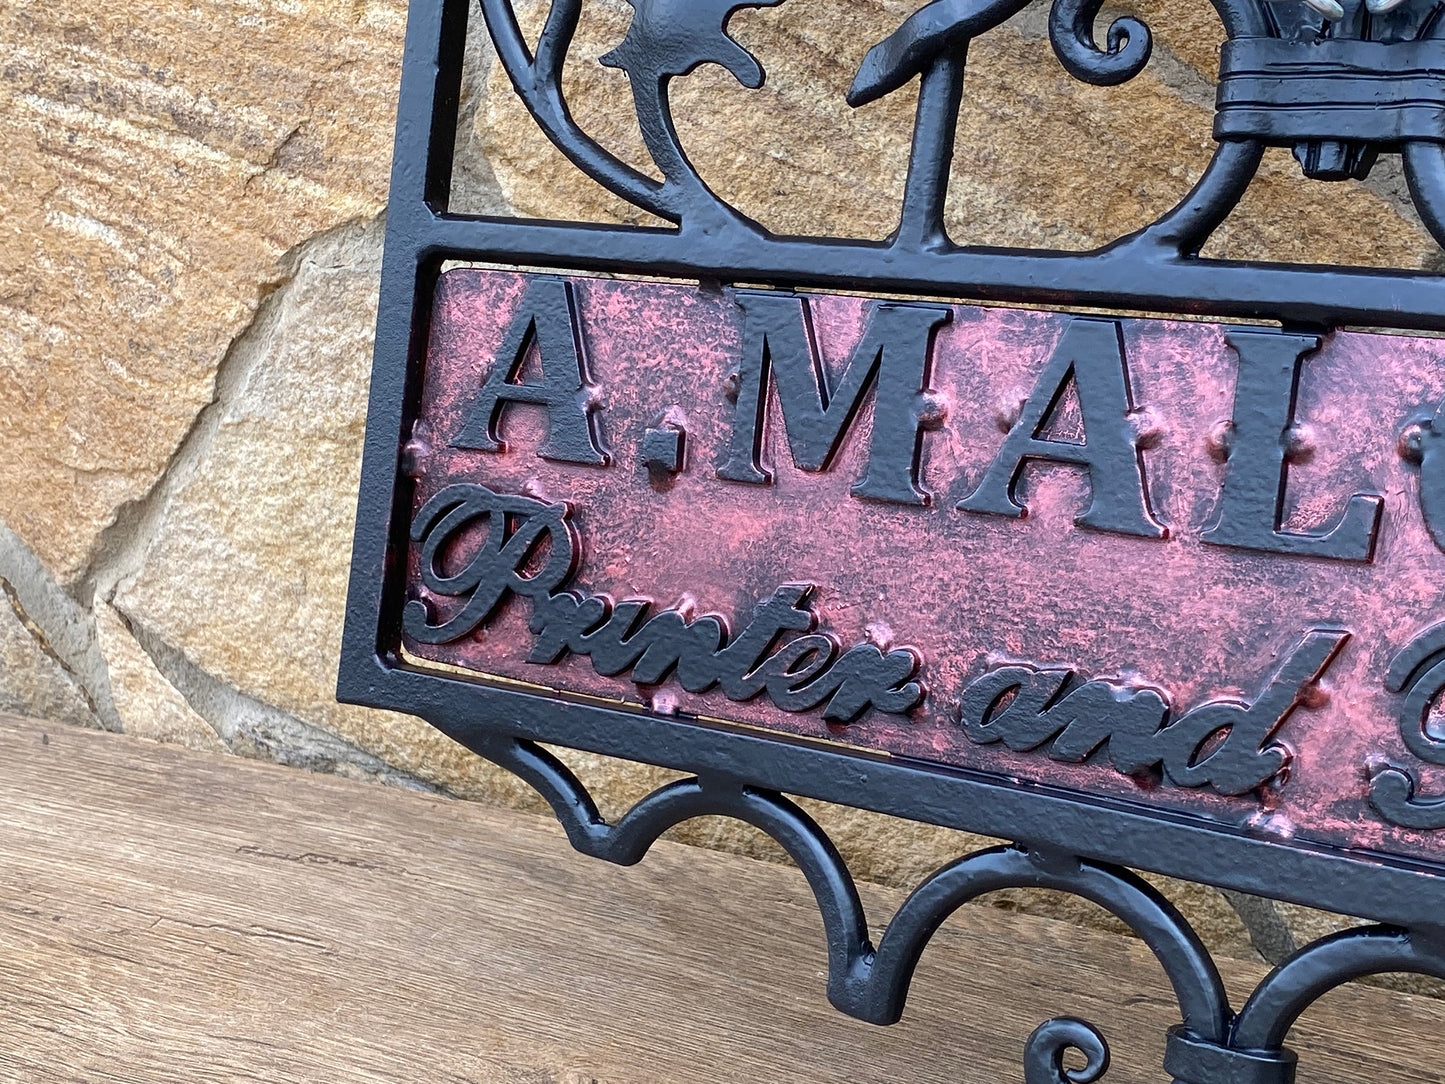 Vintage plaque, vintage, hand forged plaque, address sign, restaurant, caffe, personalized plaque, initials, family sign, personalized sign